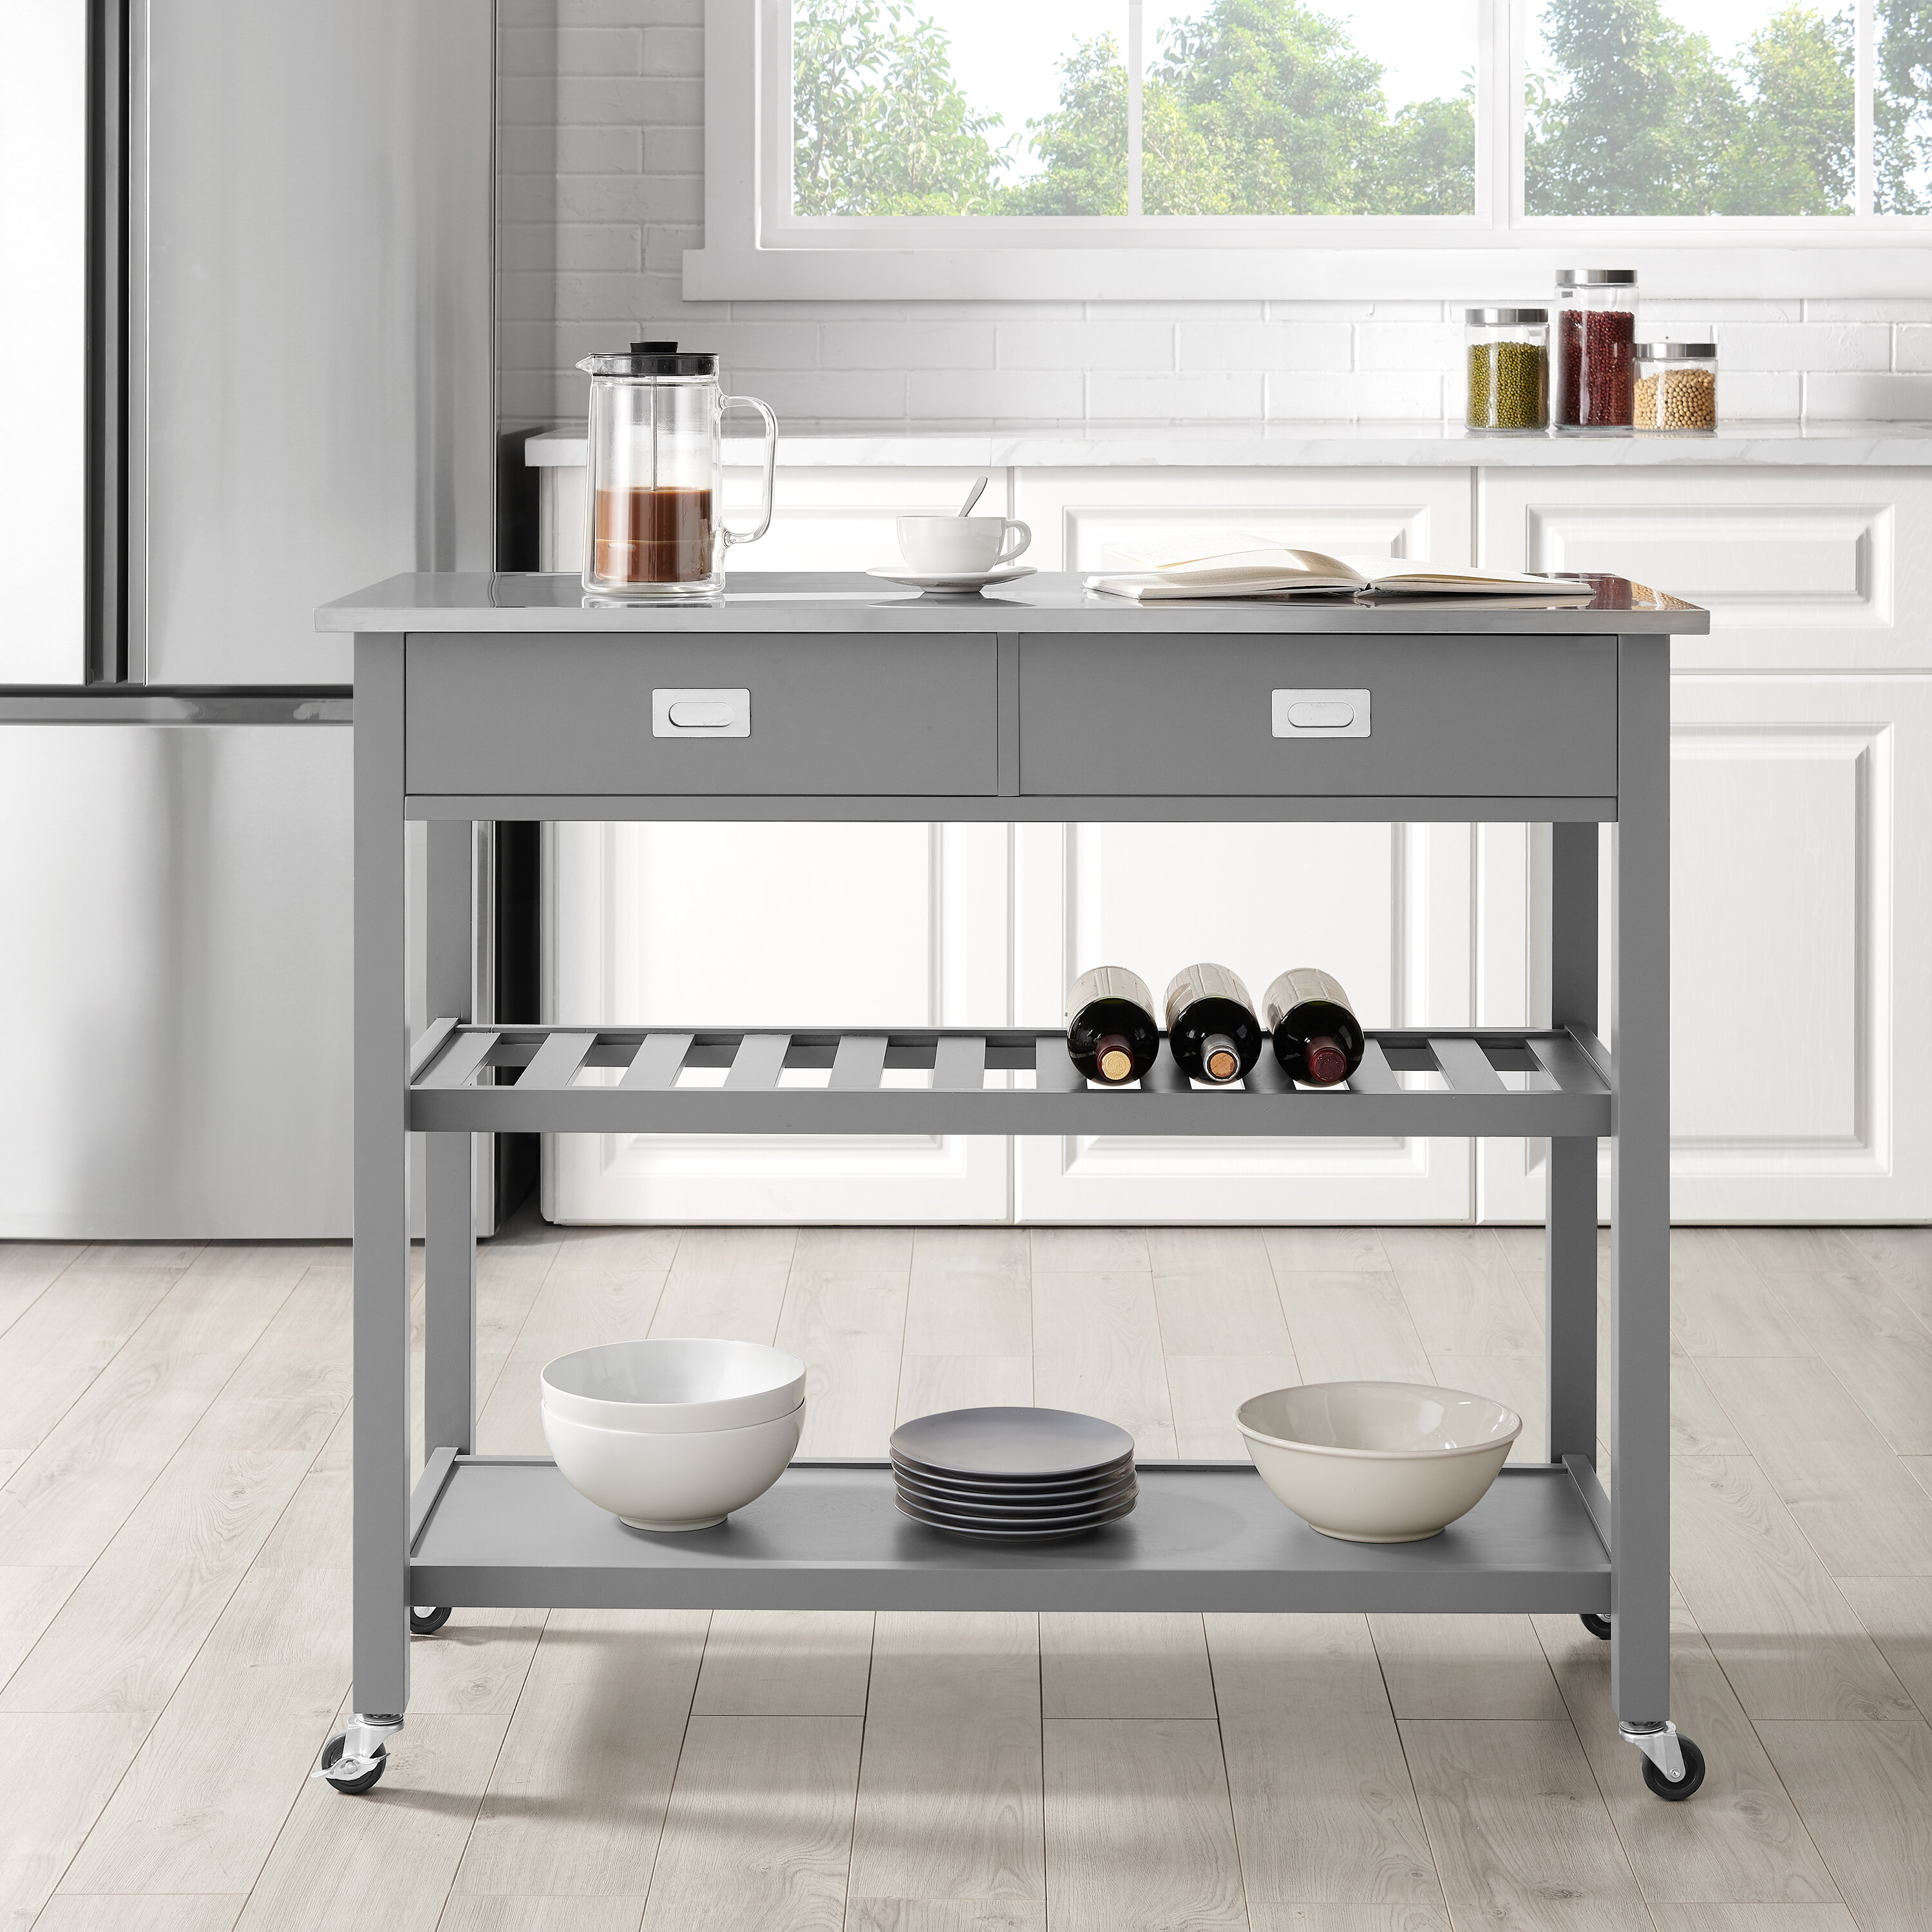 Ebern Designs Chloe Kitchen Island With Stainless Steel Top Reviews Wayfairca